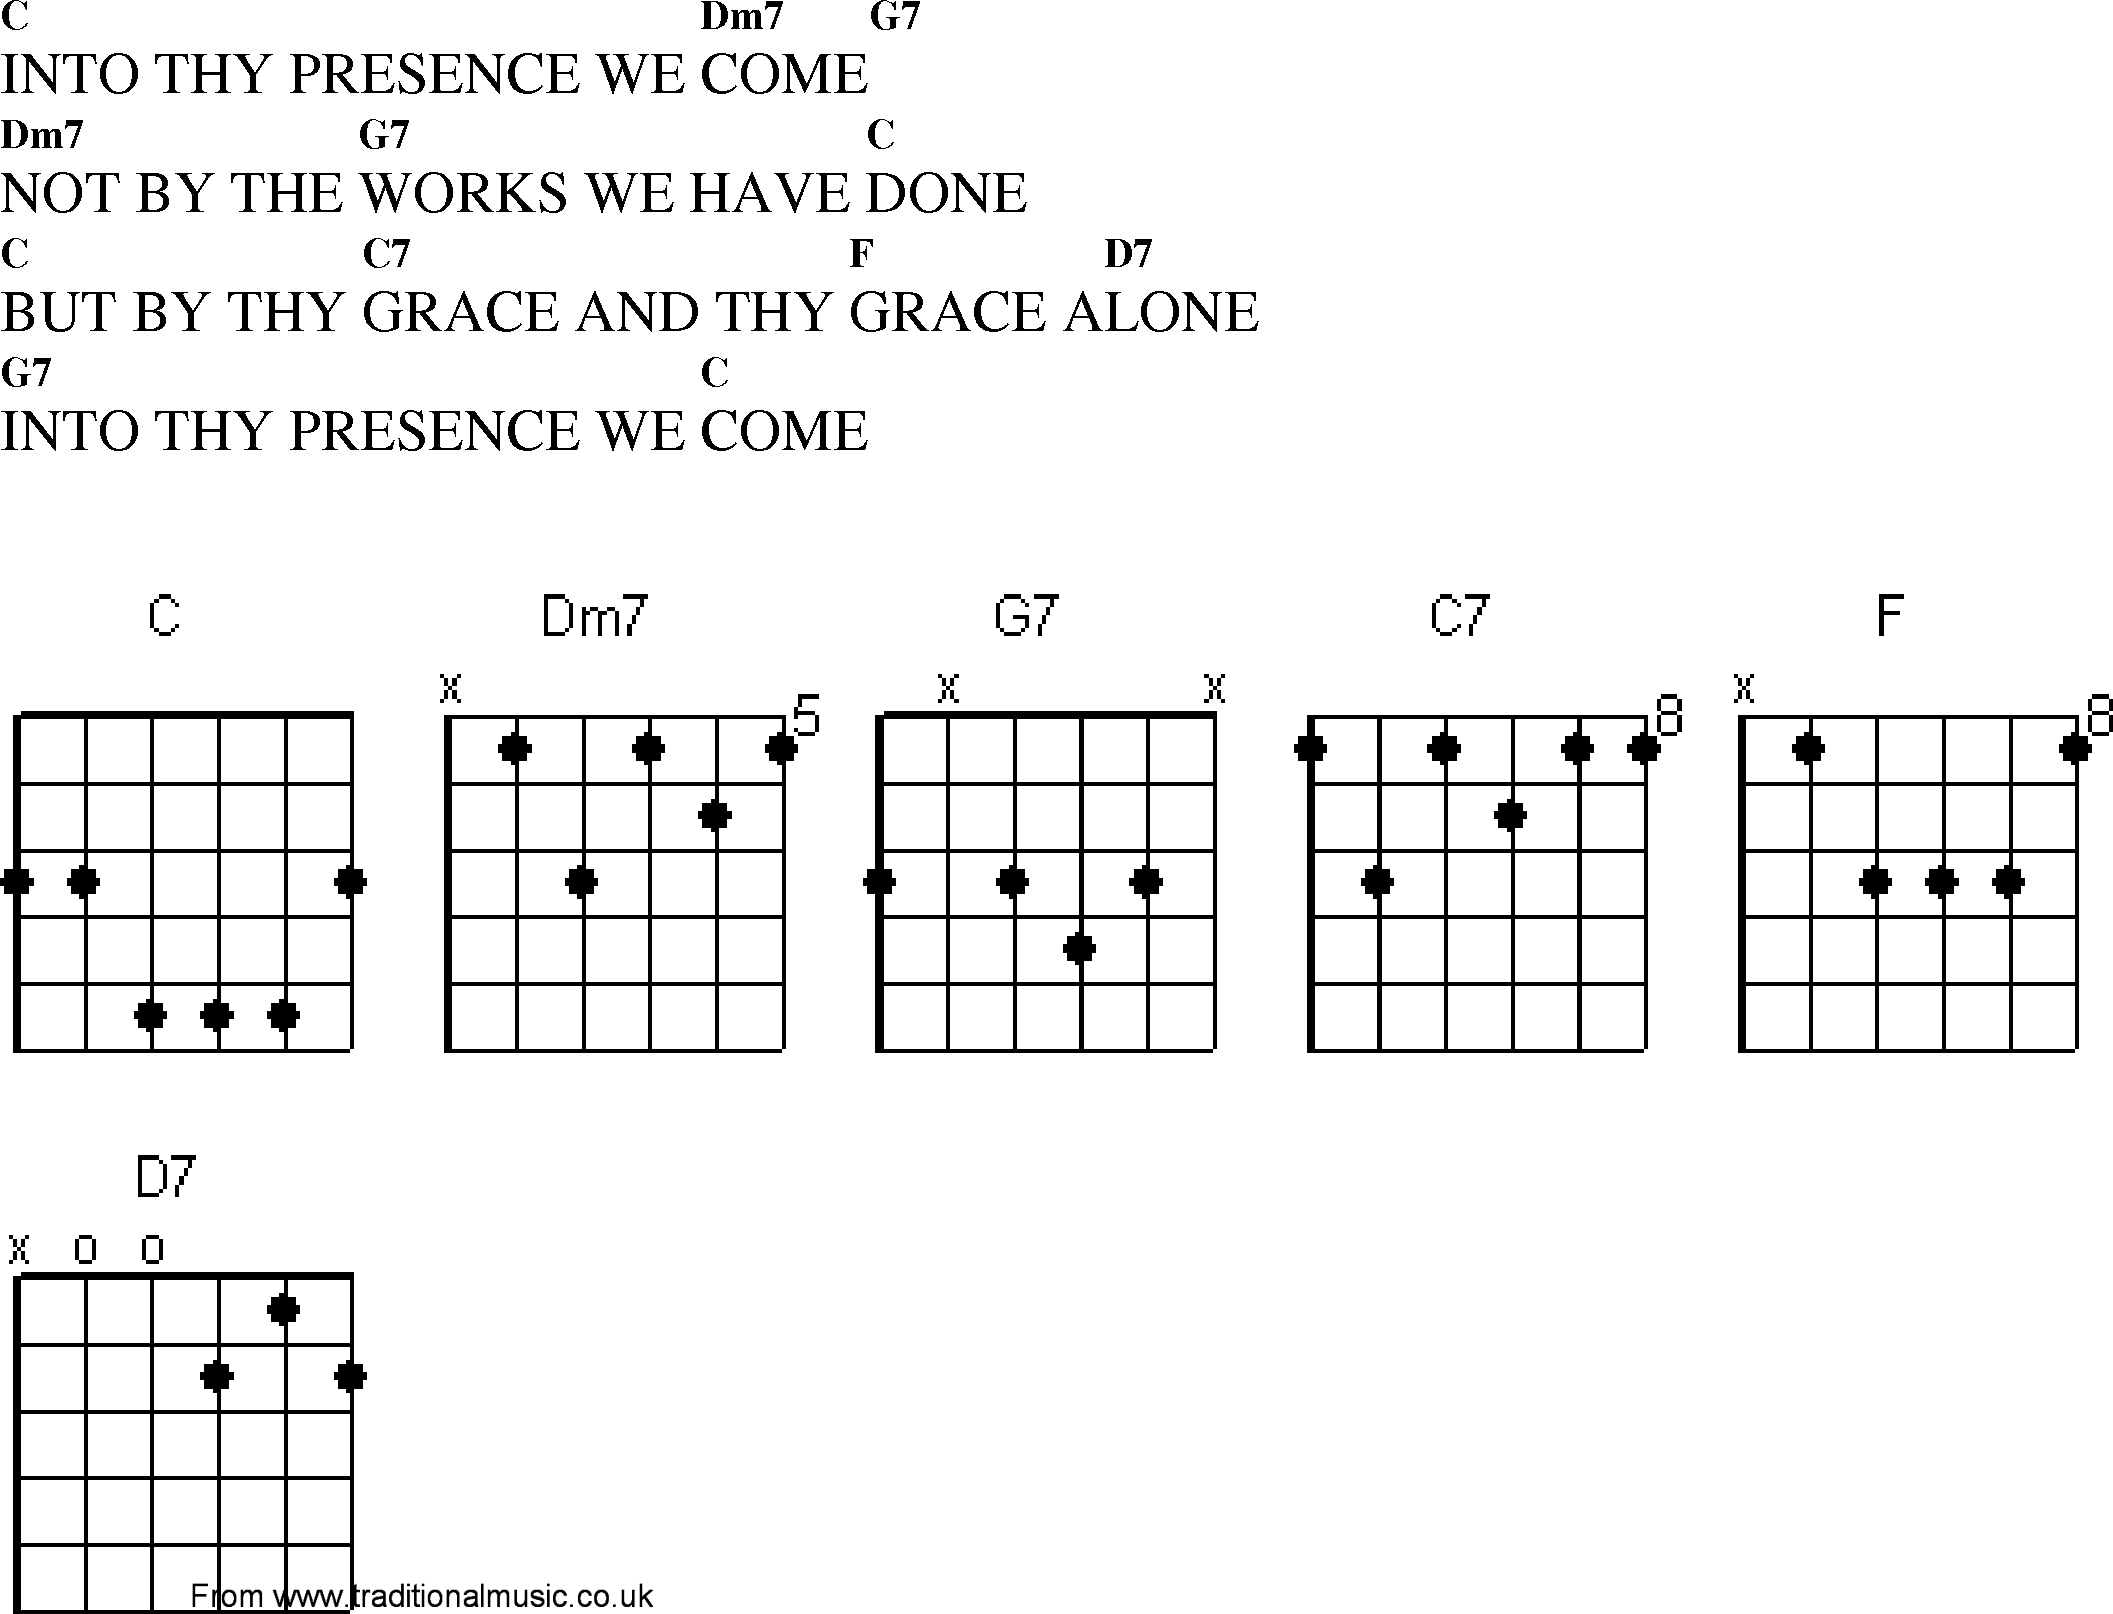 Gospel Song: into_thy_presence_we_come, lyrics and chords.